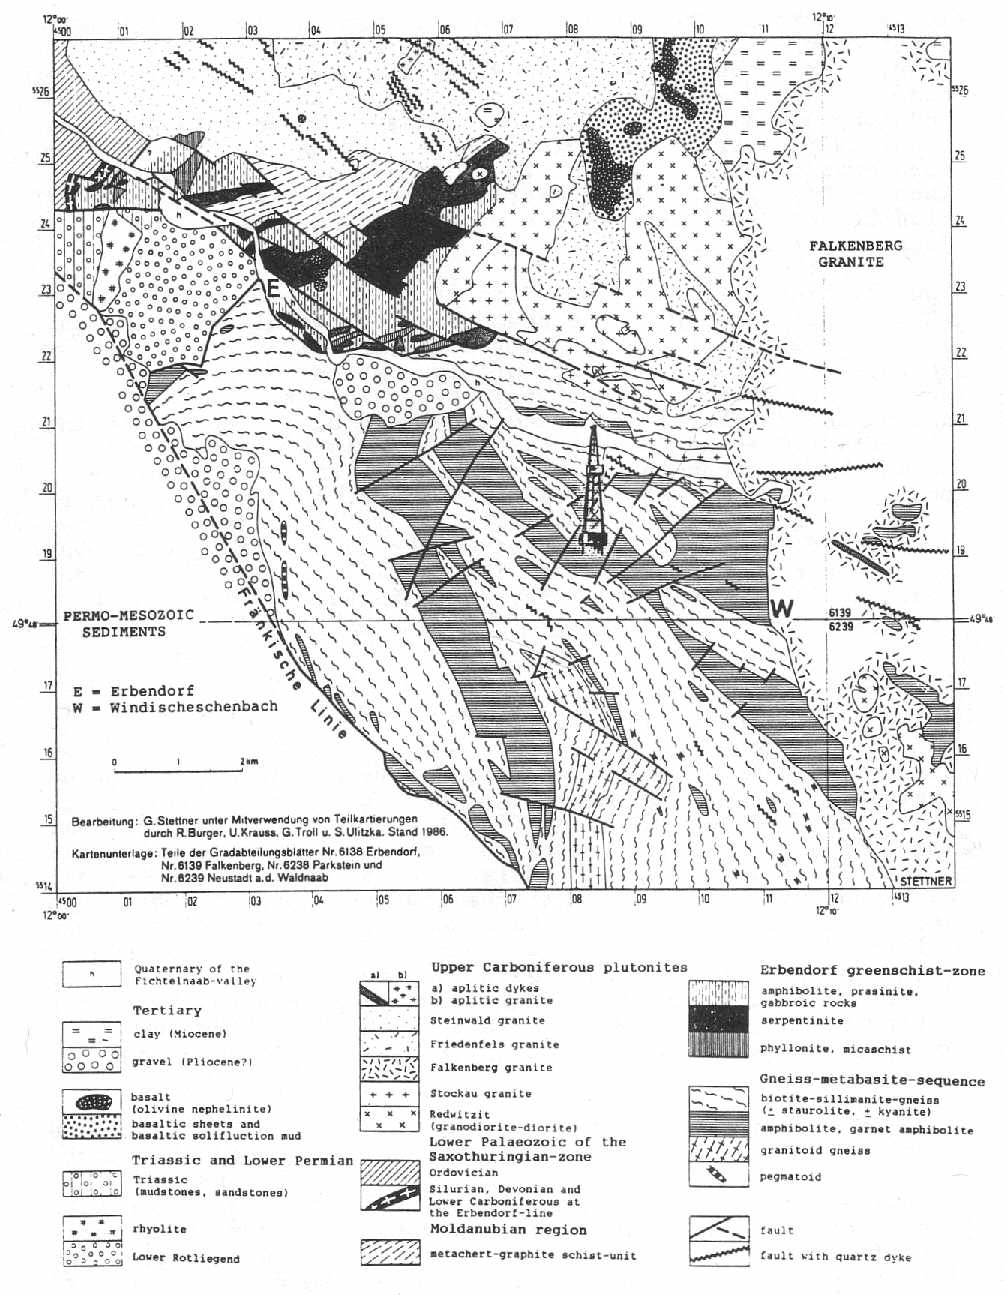 Geological map of the KTB drilling location